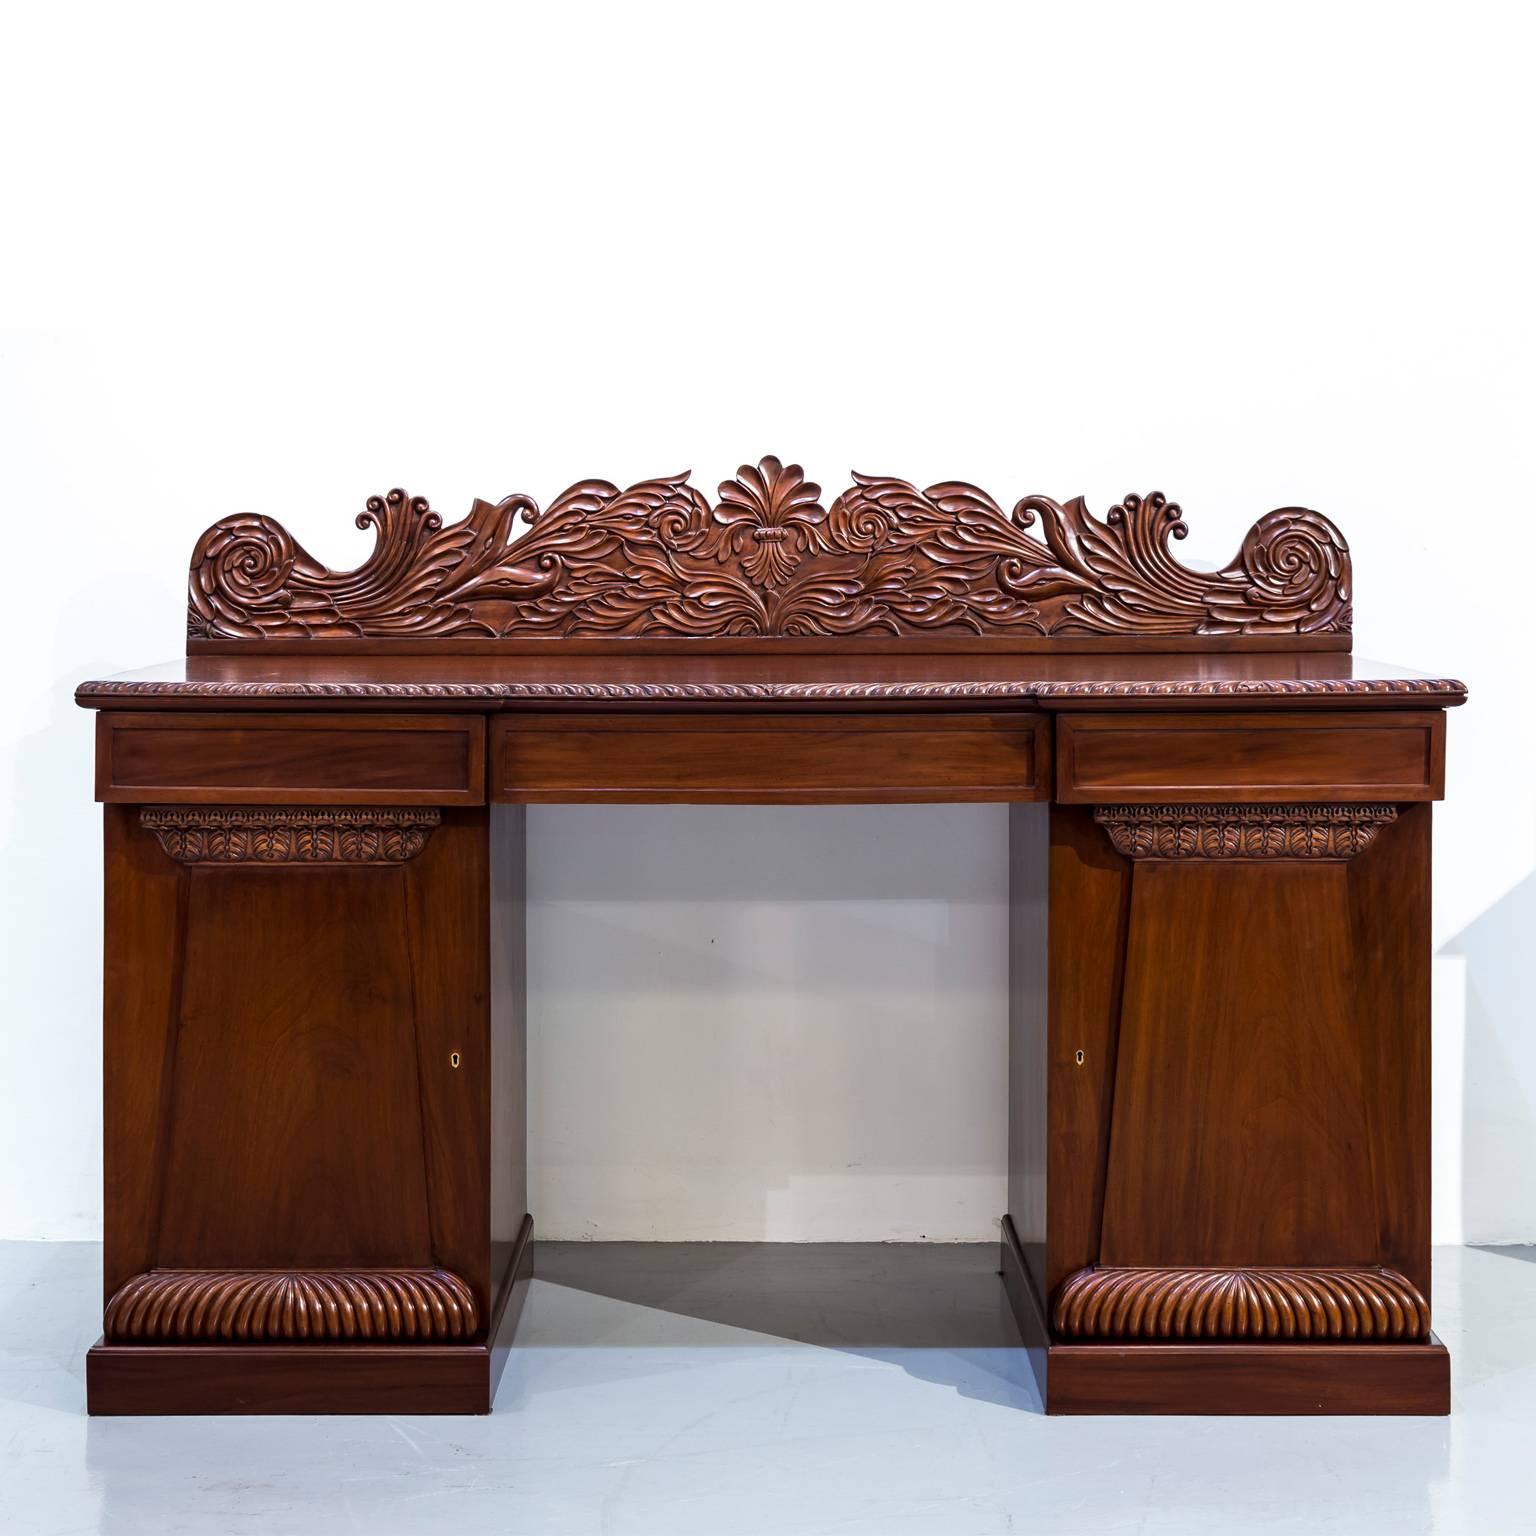 A fine Anglo-Indian mahogany pedestal sideboard.
The sideboard sits on two rectangular piers with hinged doors that open to an interior with one central shelf. The paneled doors with nice decorative carving. The top of the sideboard has an edge